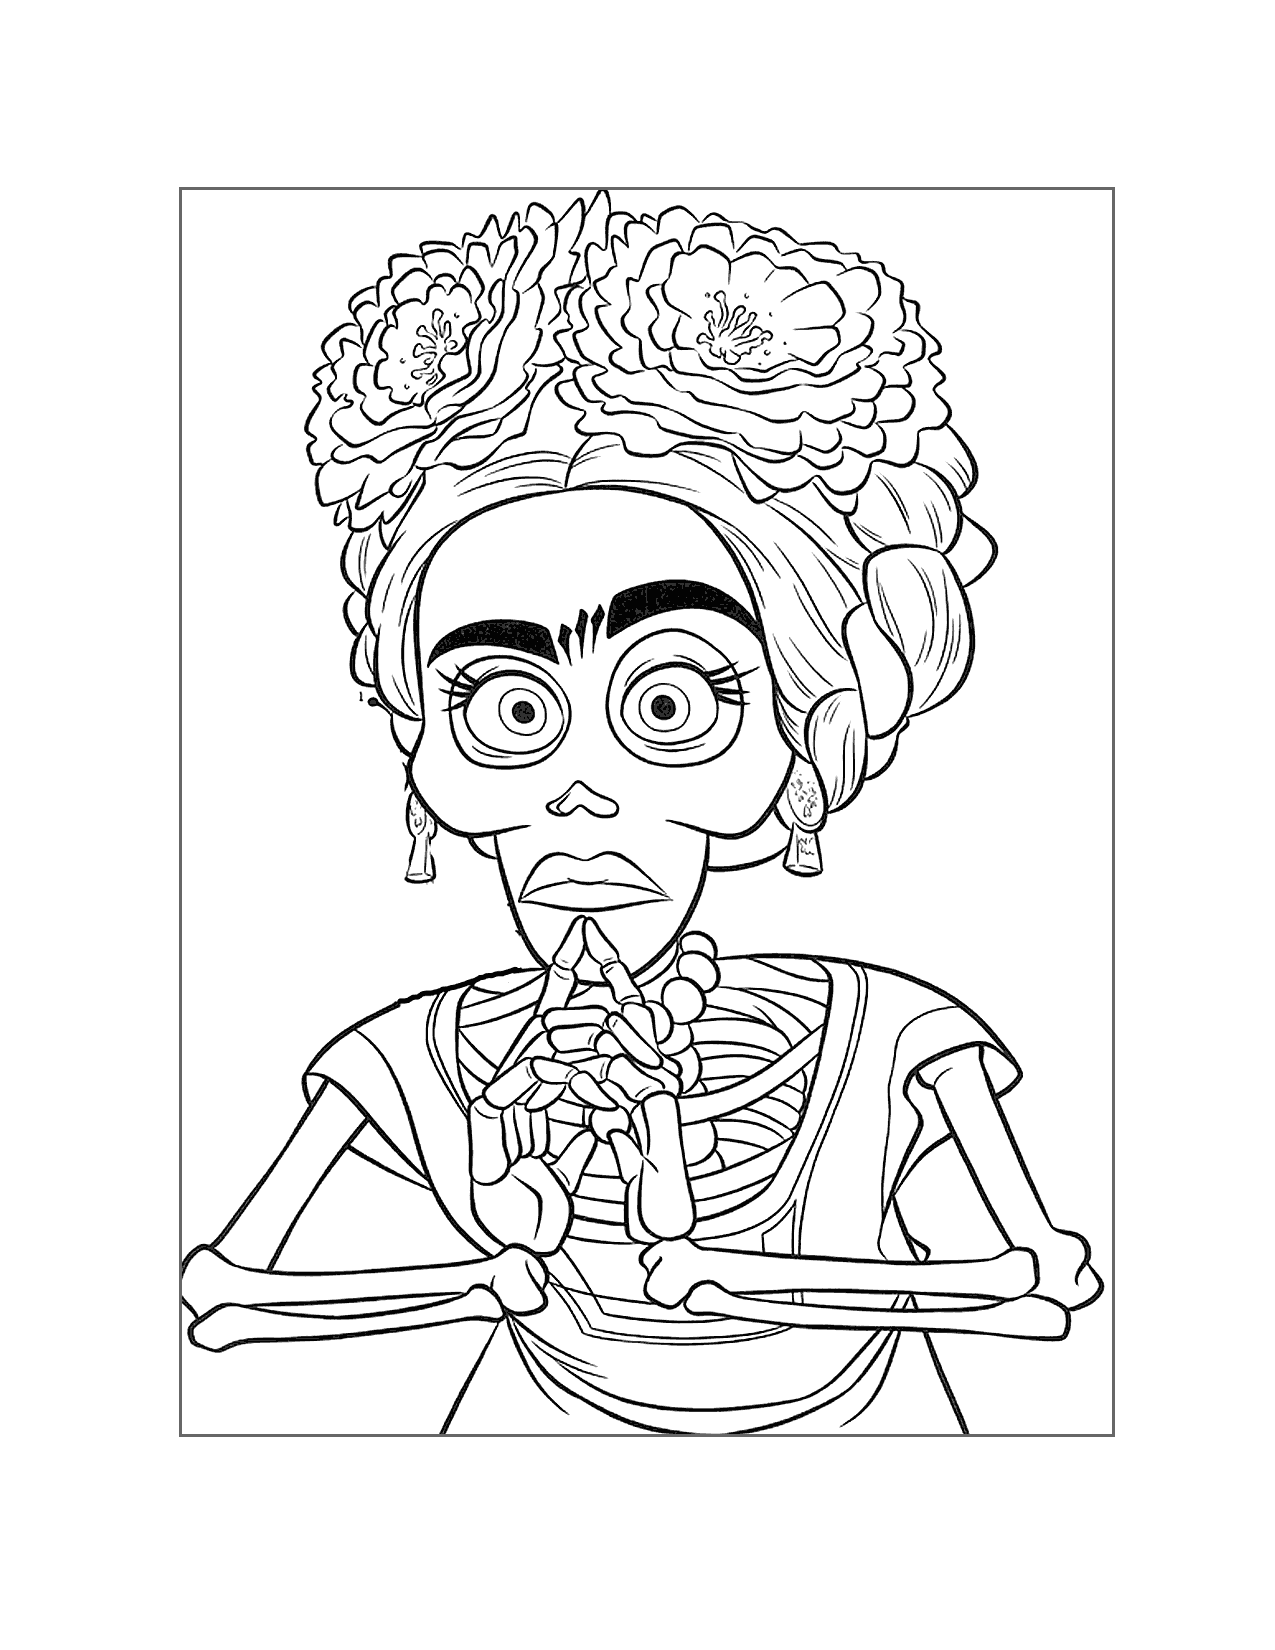 Coco Character Coloring Page